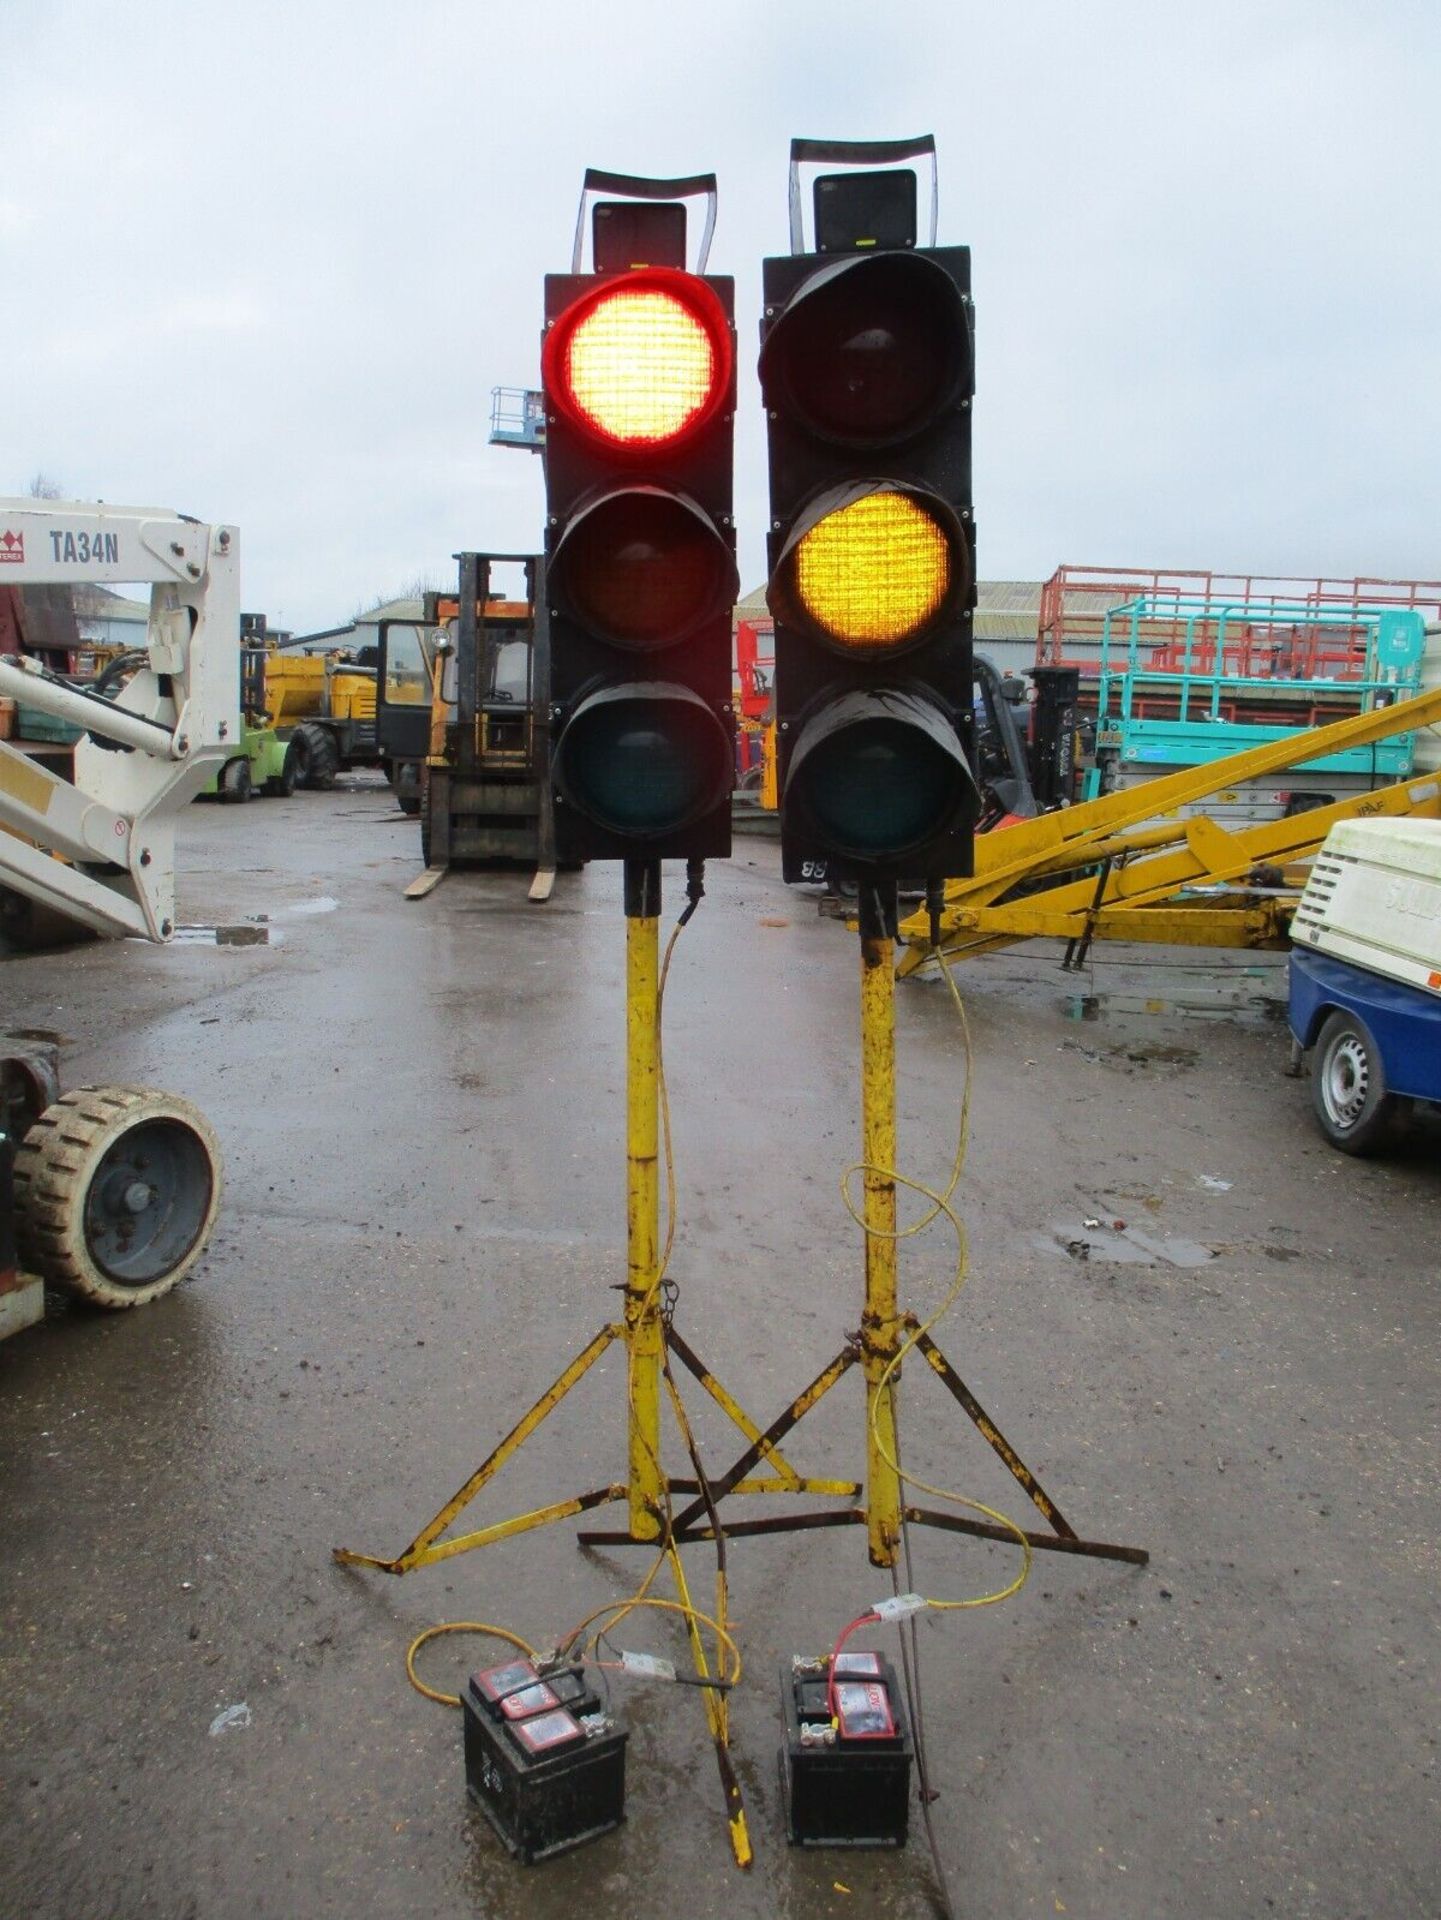 BOOT-SIZED PIKE X LITE: XL 2 TRAFFIC LIGHTS - Image 2 of 5